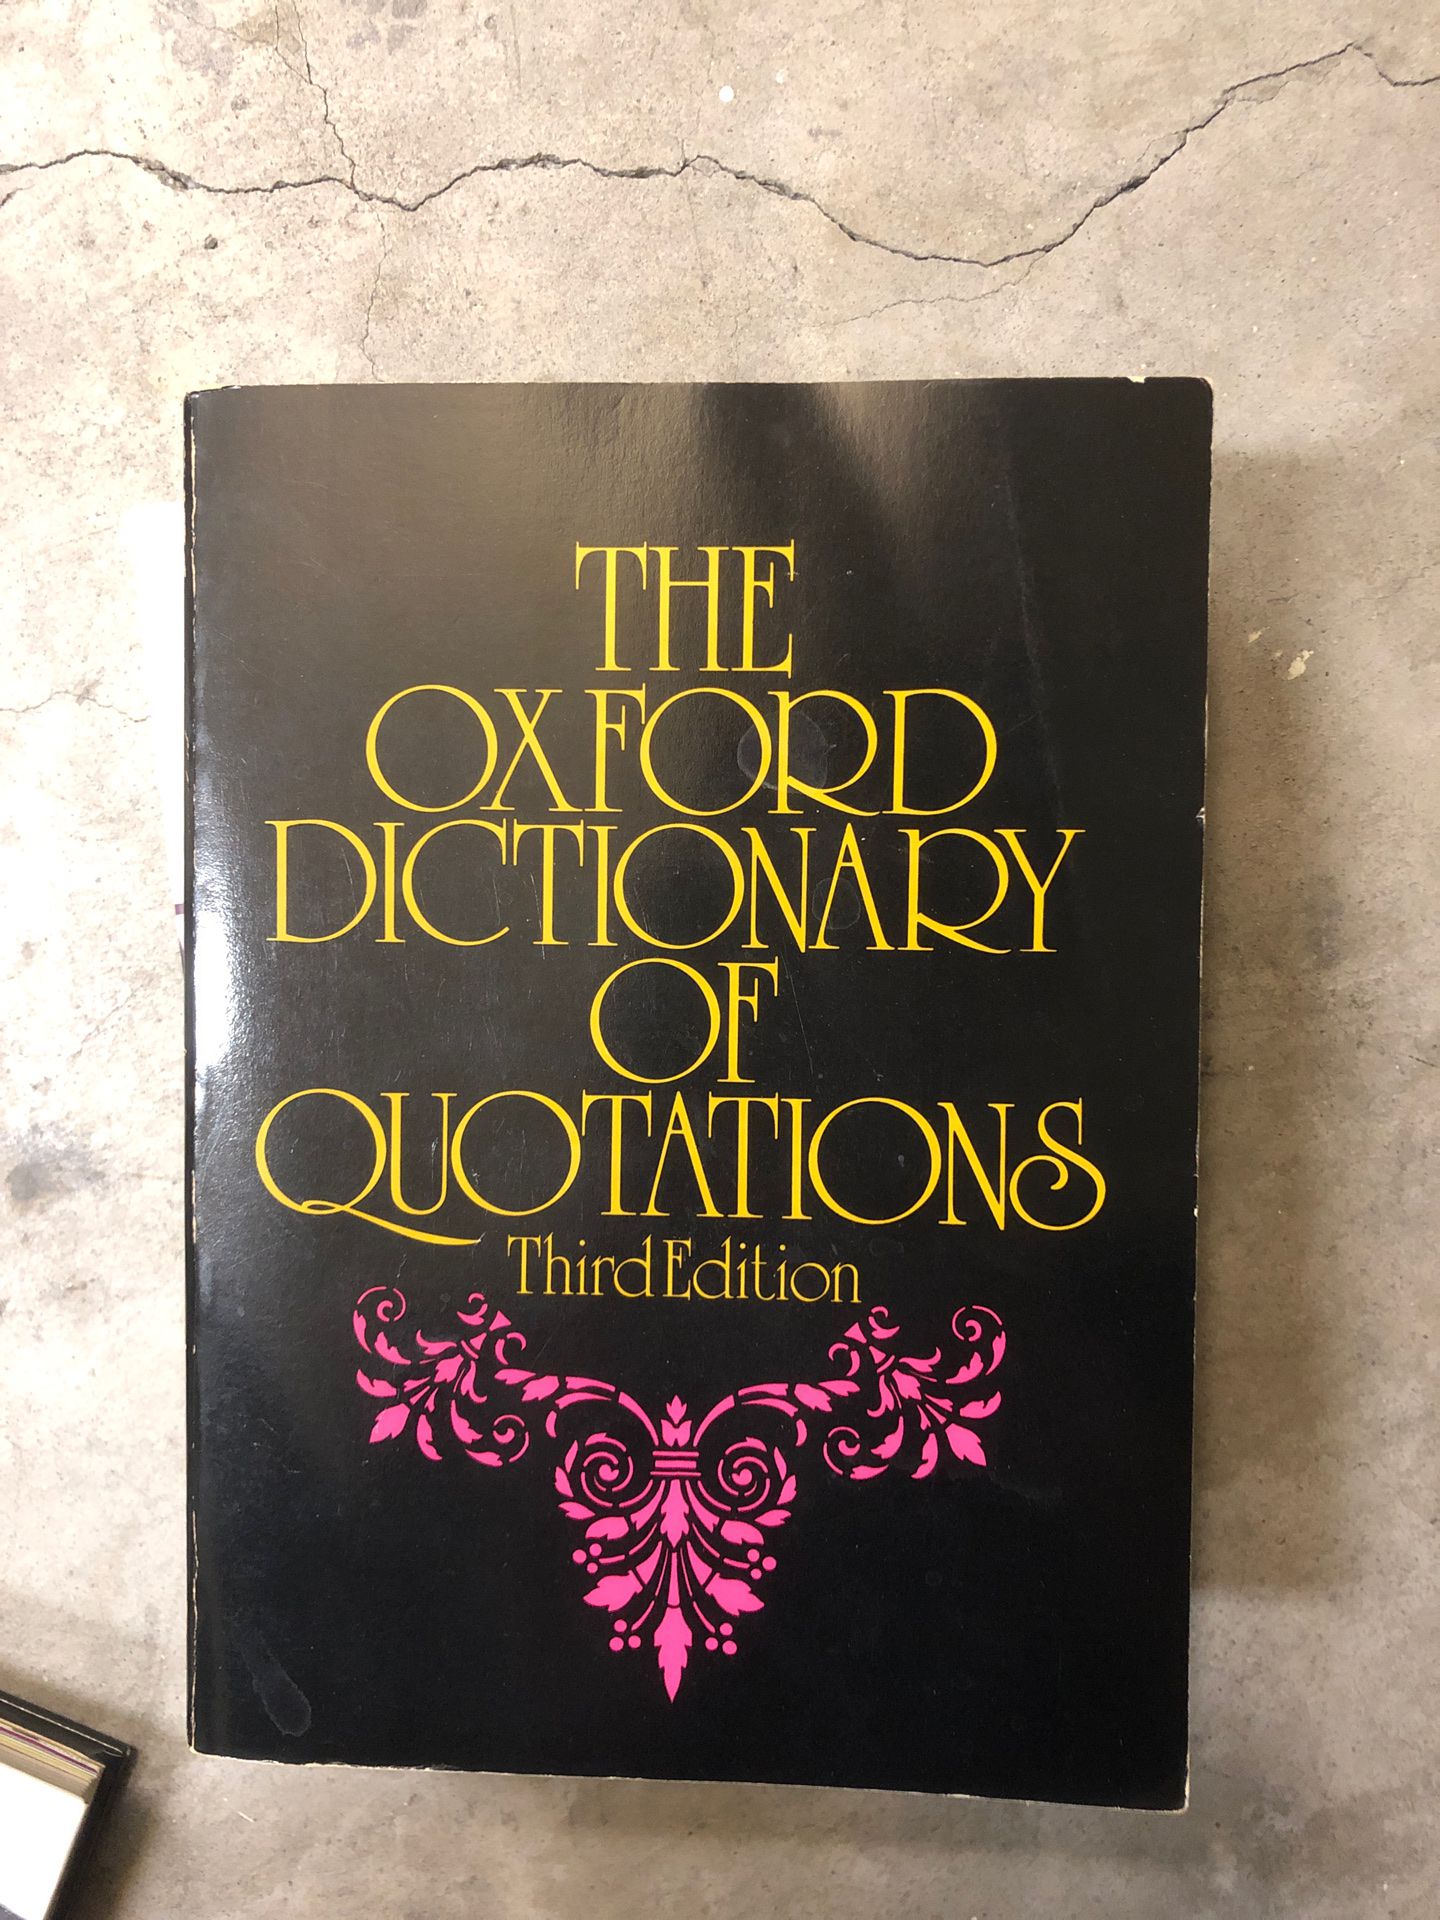 Oxford Dictionary of Quotations 3rdEdition